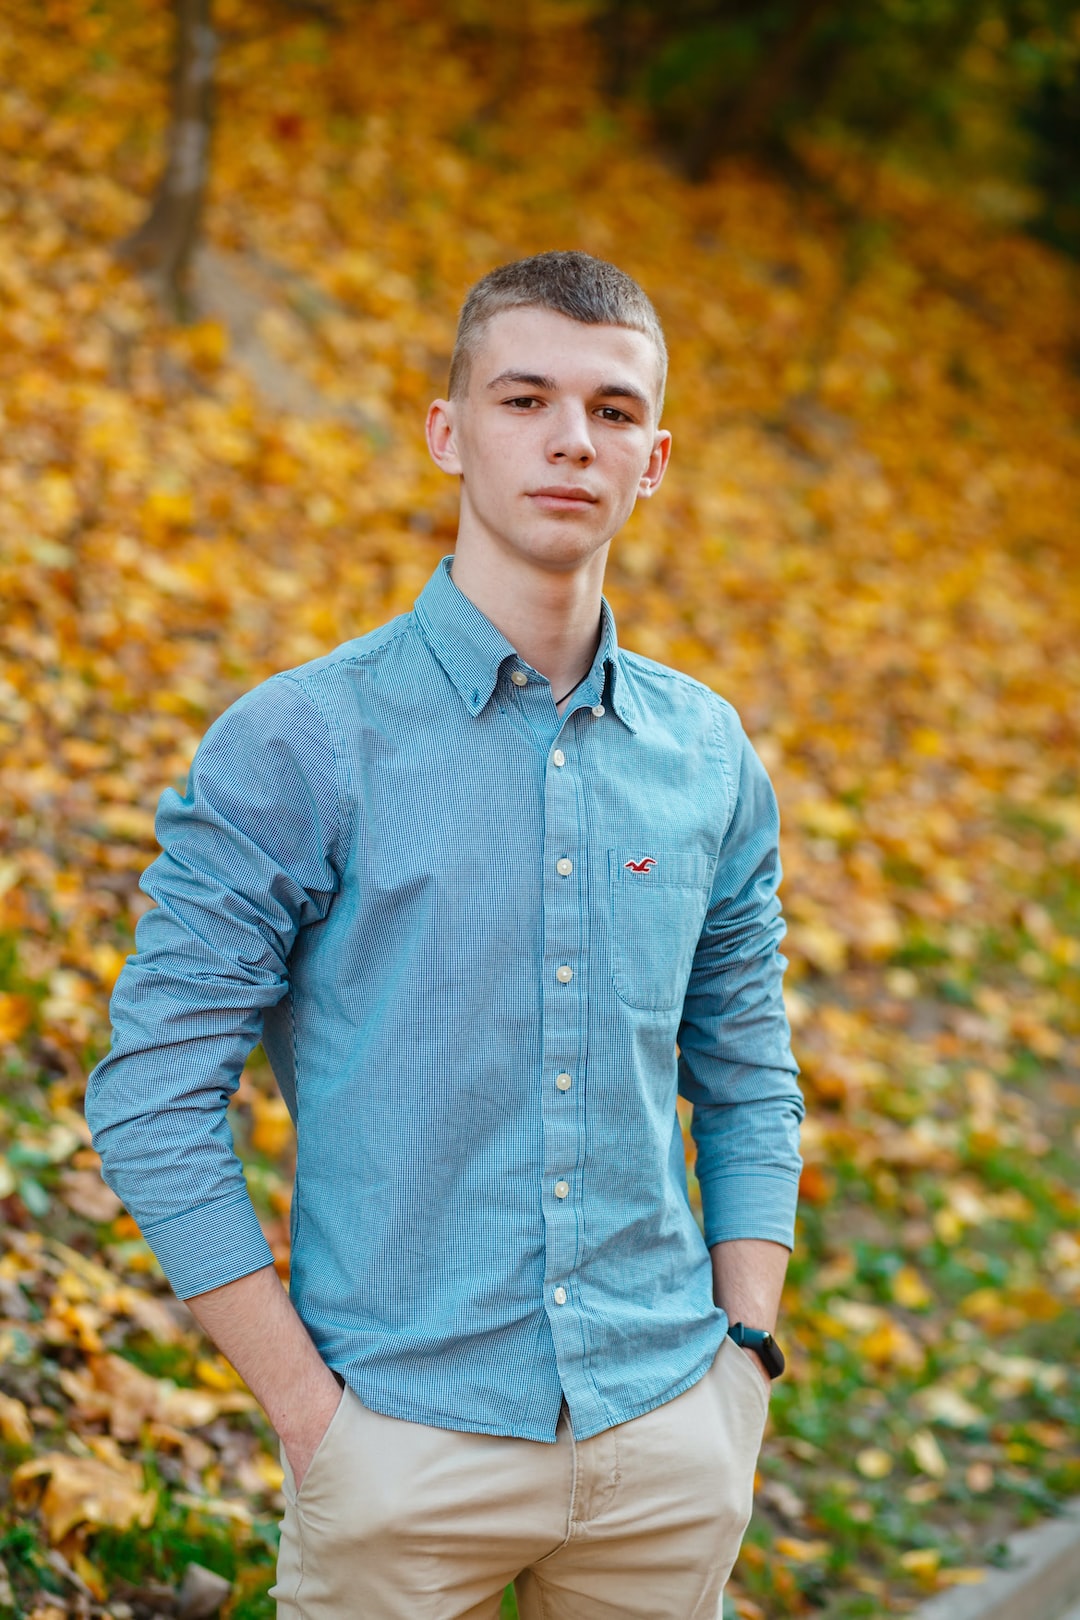 man in blue dress shirt standing near brown leaves during daytime